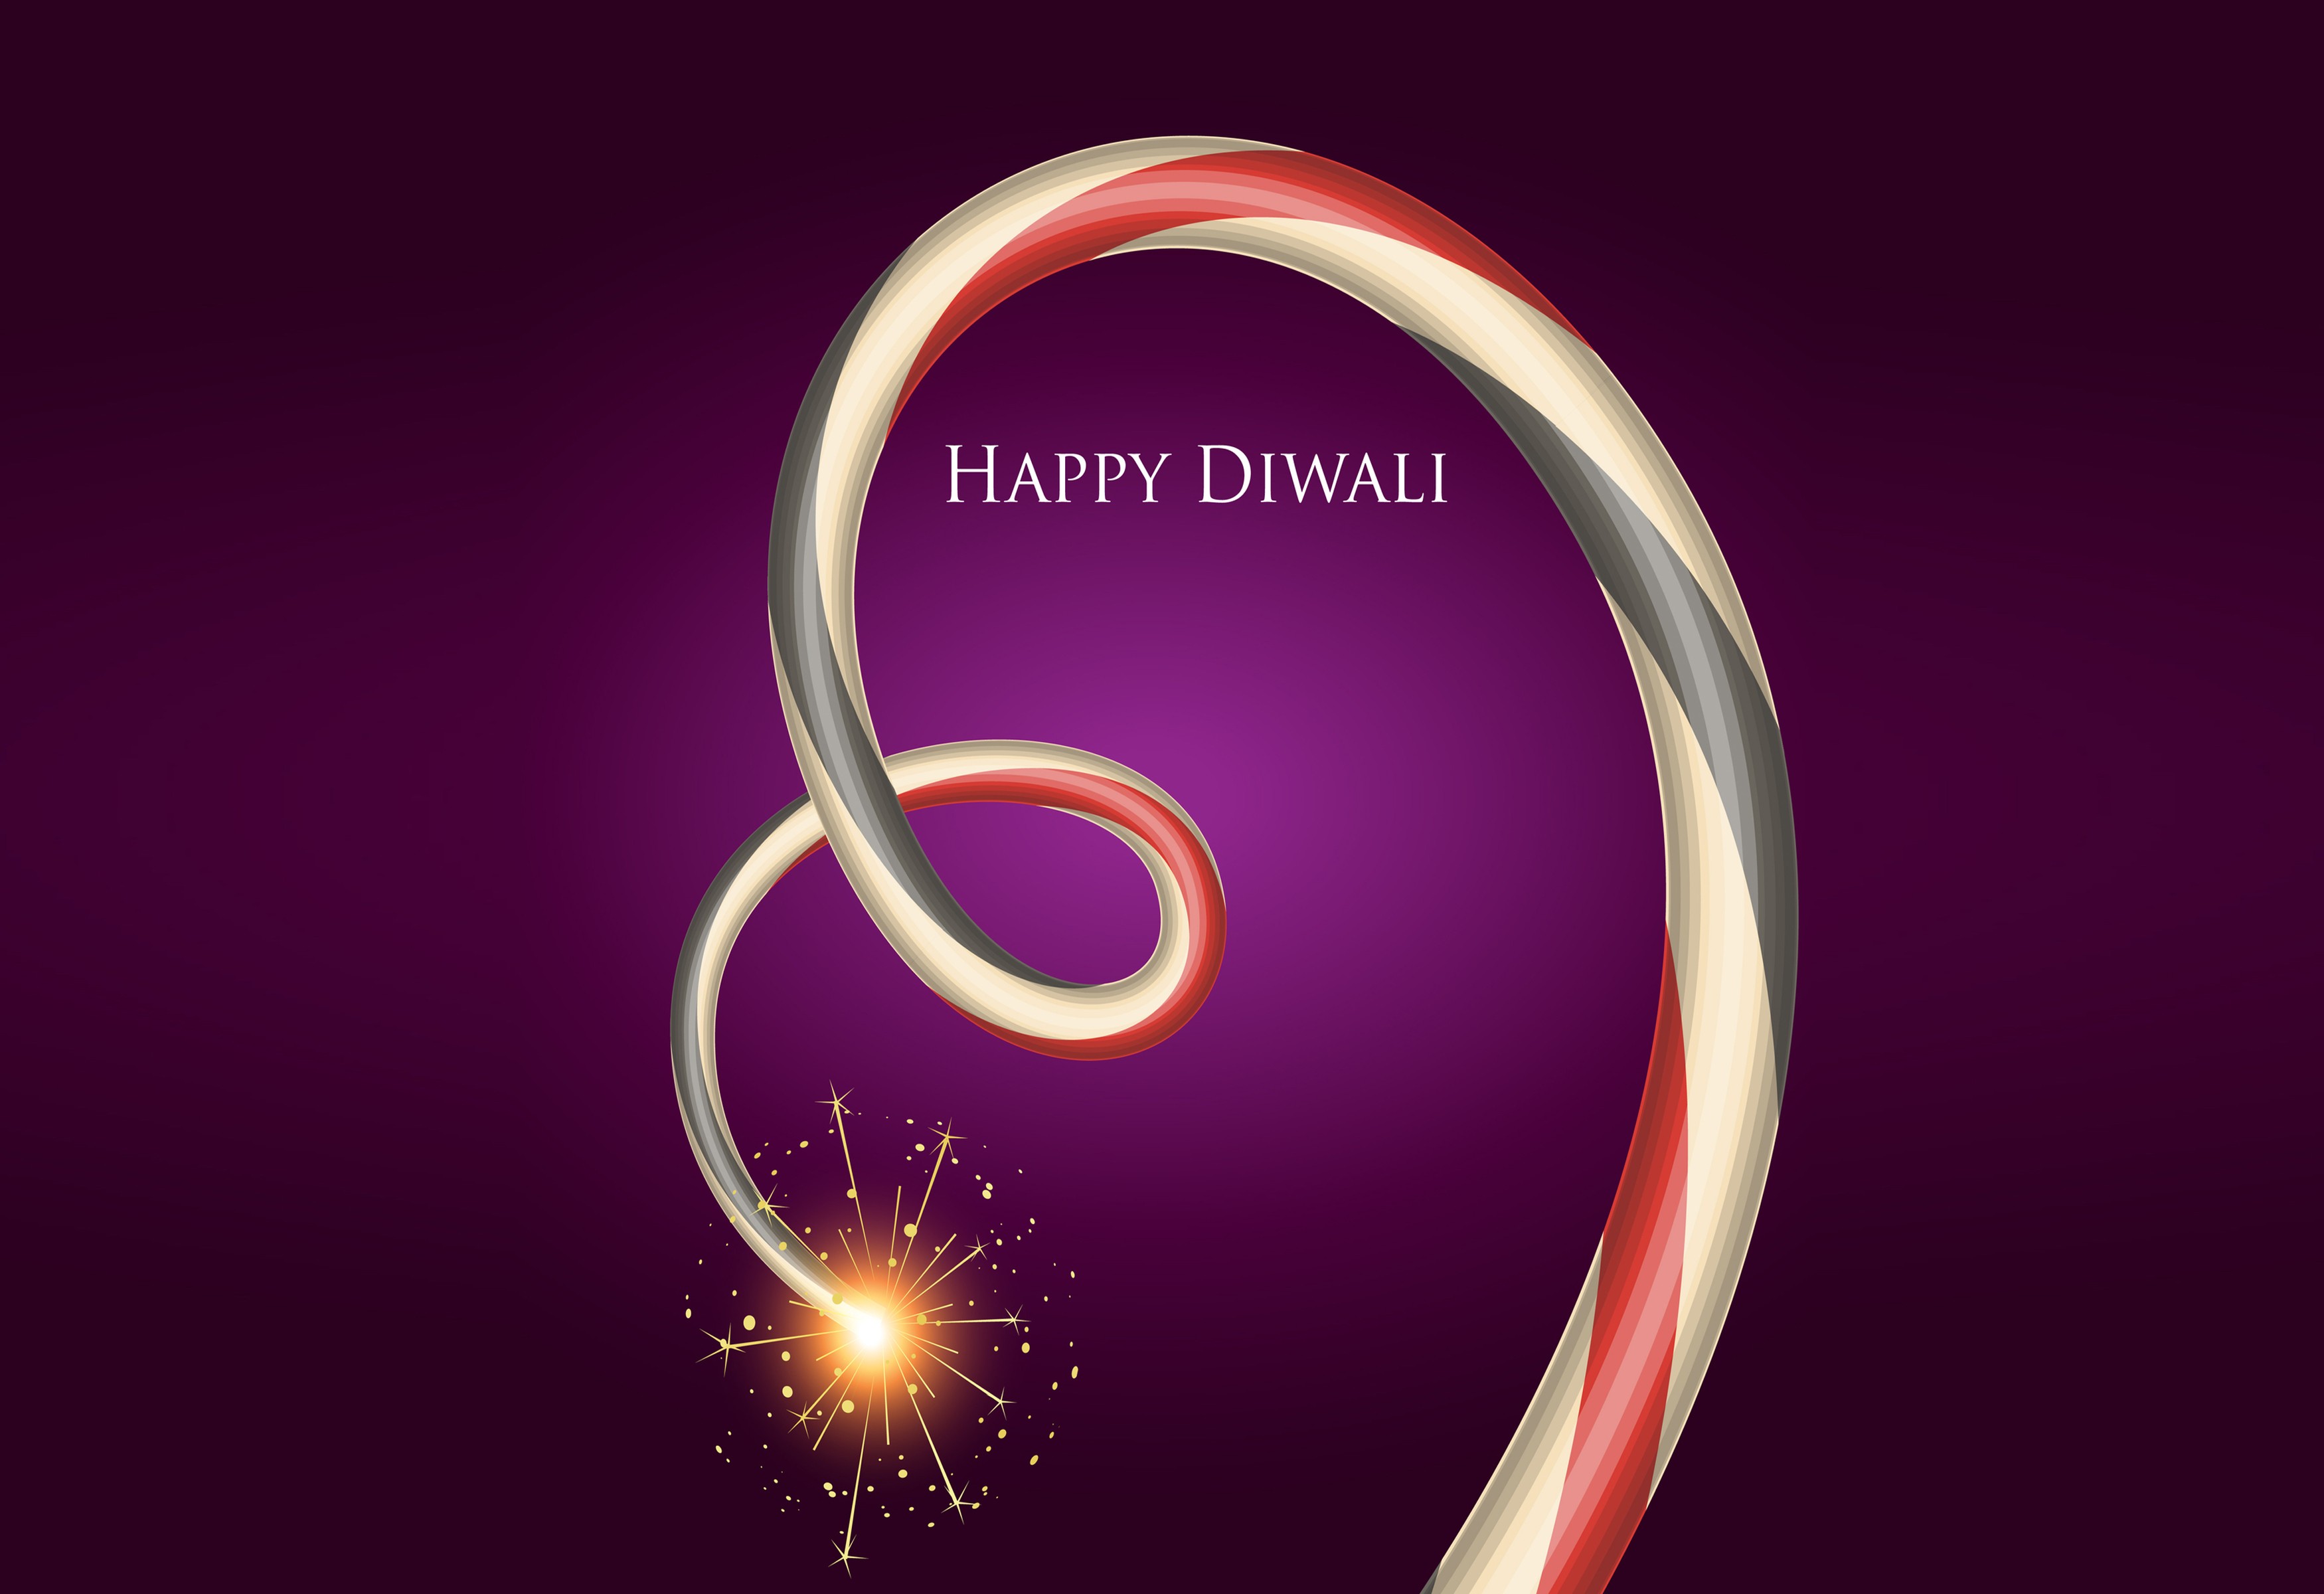 Happy-diwali-2015-firework-wishes-hd-images